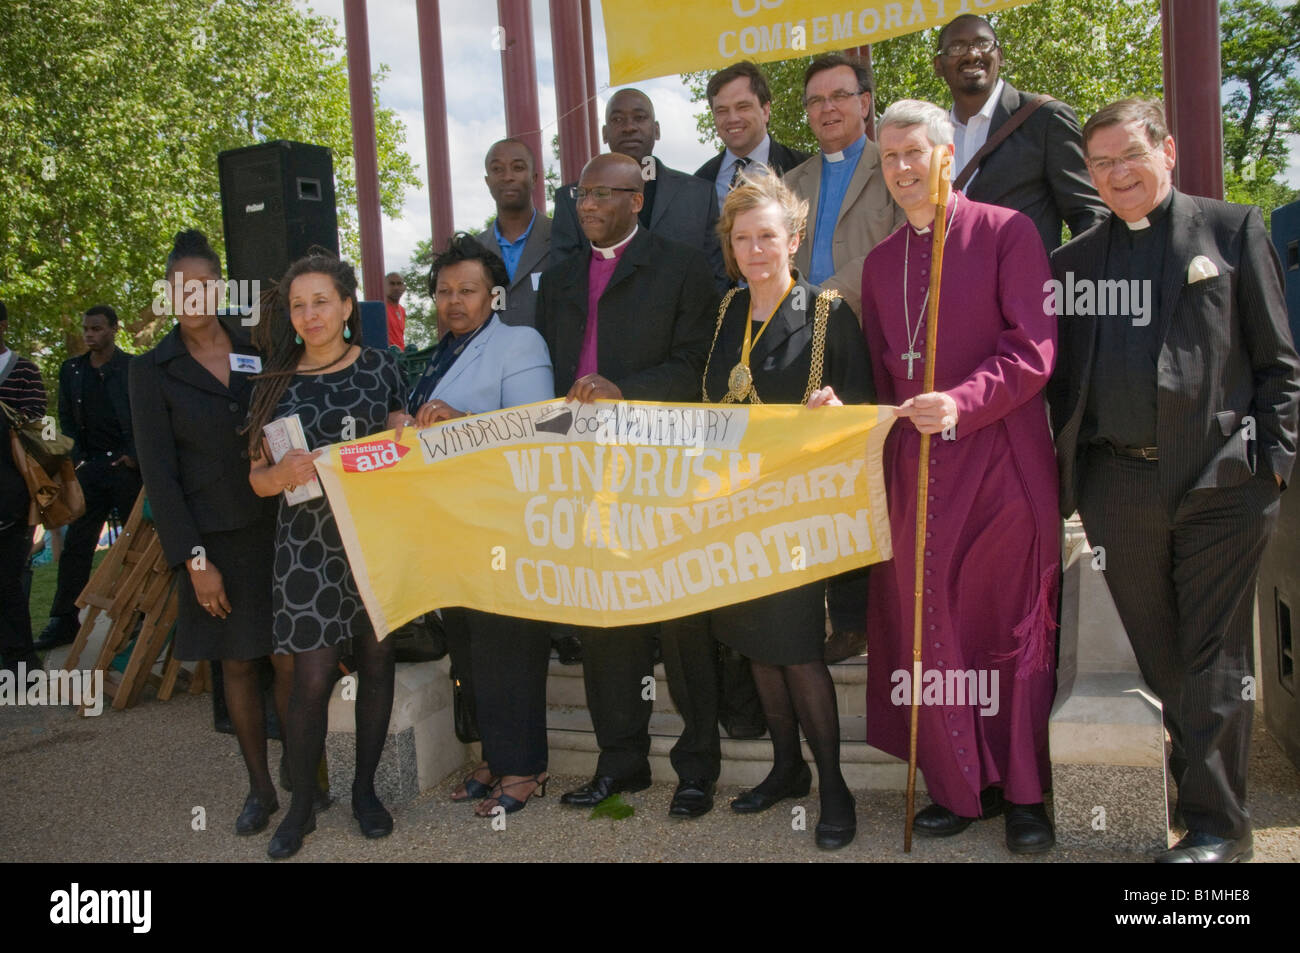 Speakers and guests at the Empire Windrush 60th anniversary event, Clapham Common Stock Photo